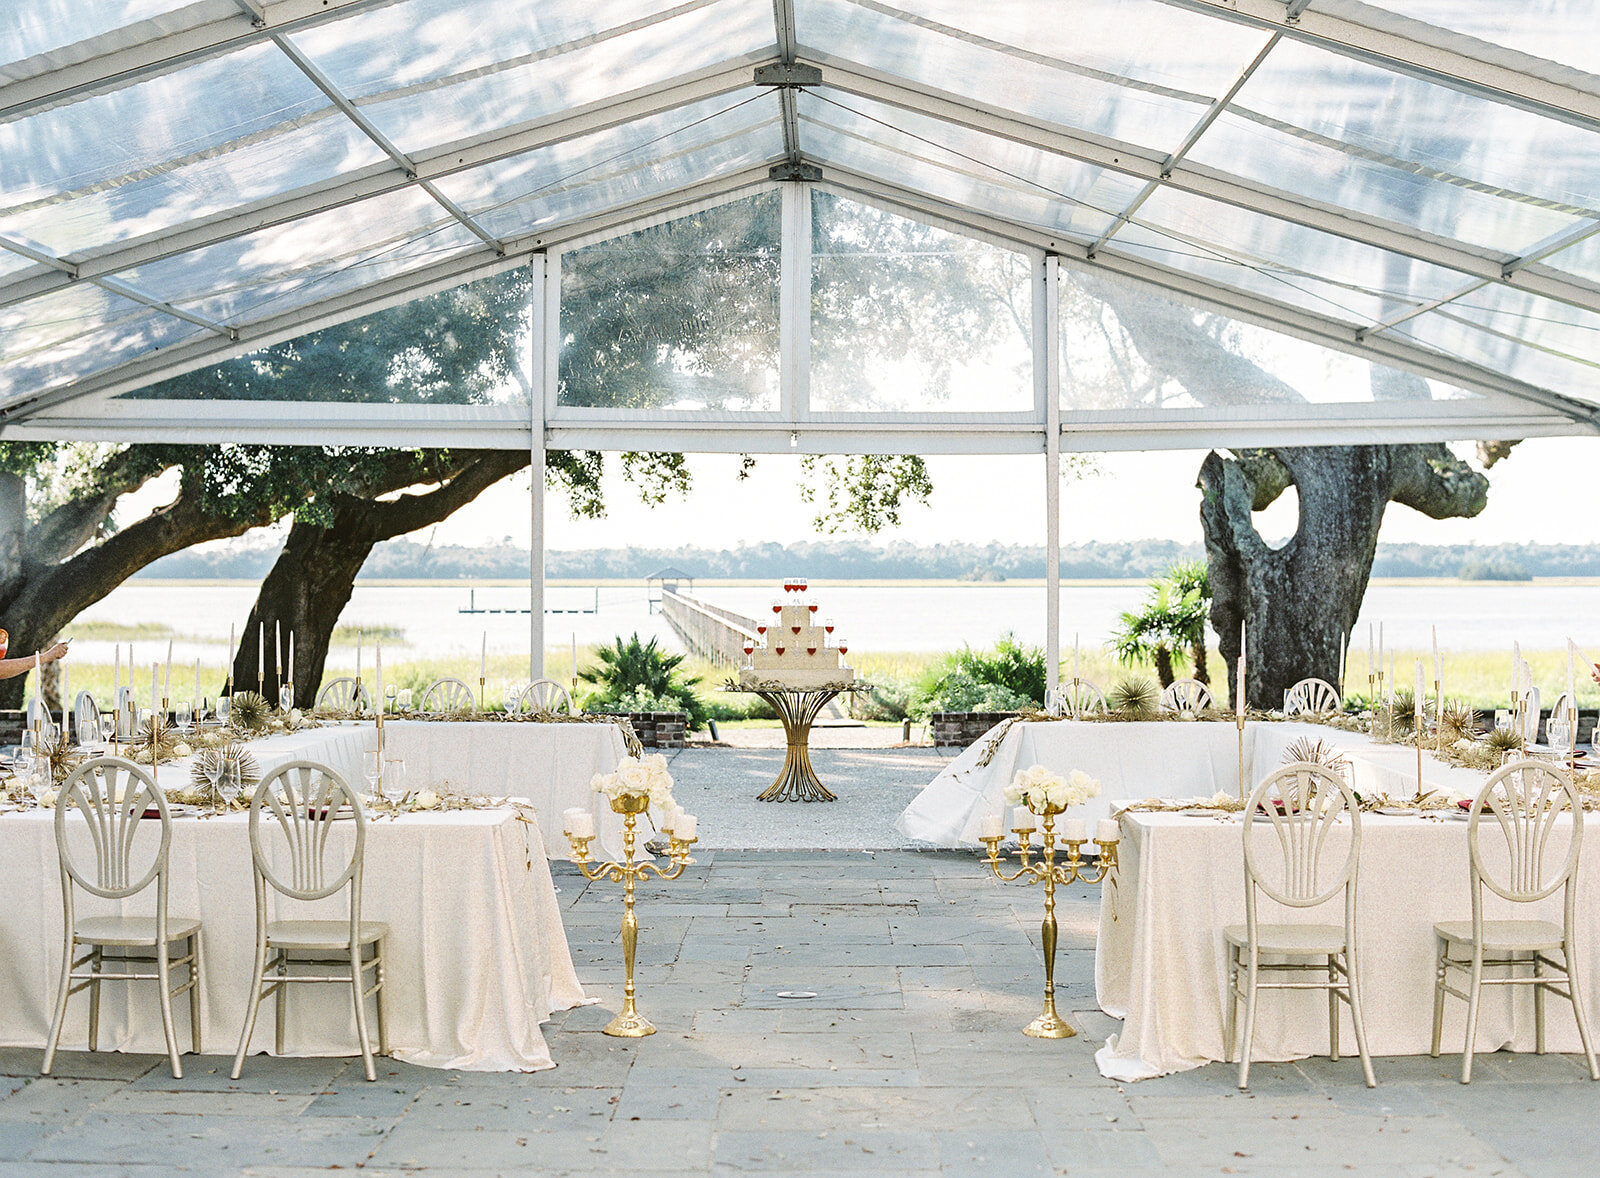 Reception at Lowndes Grove under glass tent looking out to the oaks, dock and water. Long tables forming an open square. Gold chairs, tall floor gold candelabras with white pillar candles. Gold painted myrtle leaves and gold painted baby's breath running down middle of all tables and cascading down the ends of the tables. Gold candlesticks with white tapper candles. Drink table in the middle behind the tables with half white drink and red drink in champagne glasses. Photographed at Lowndes Grove wedding by wedding photographers in Charleston Amy Mulder Photography.